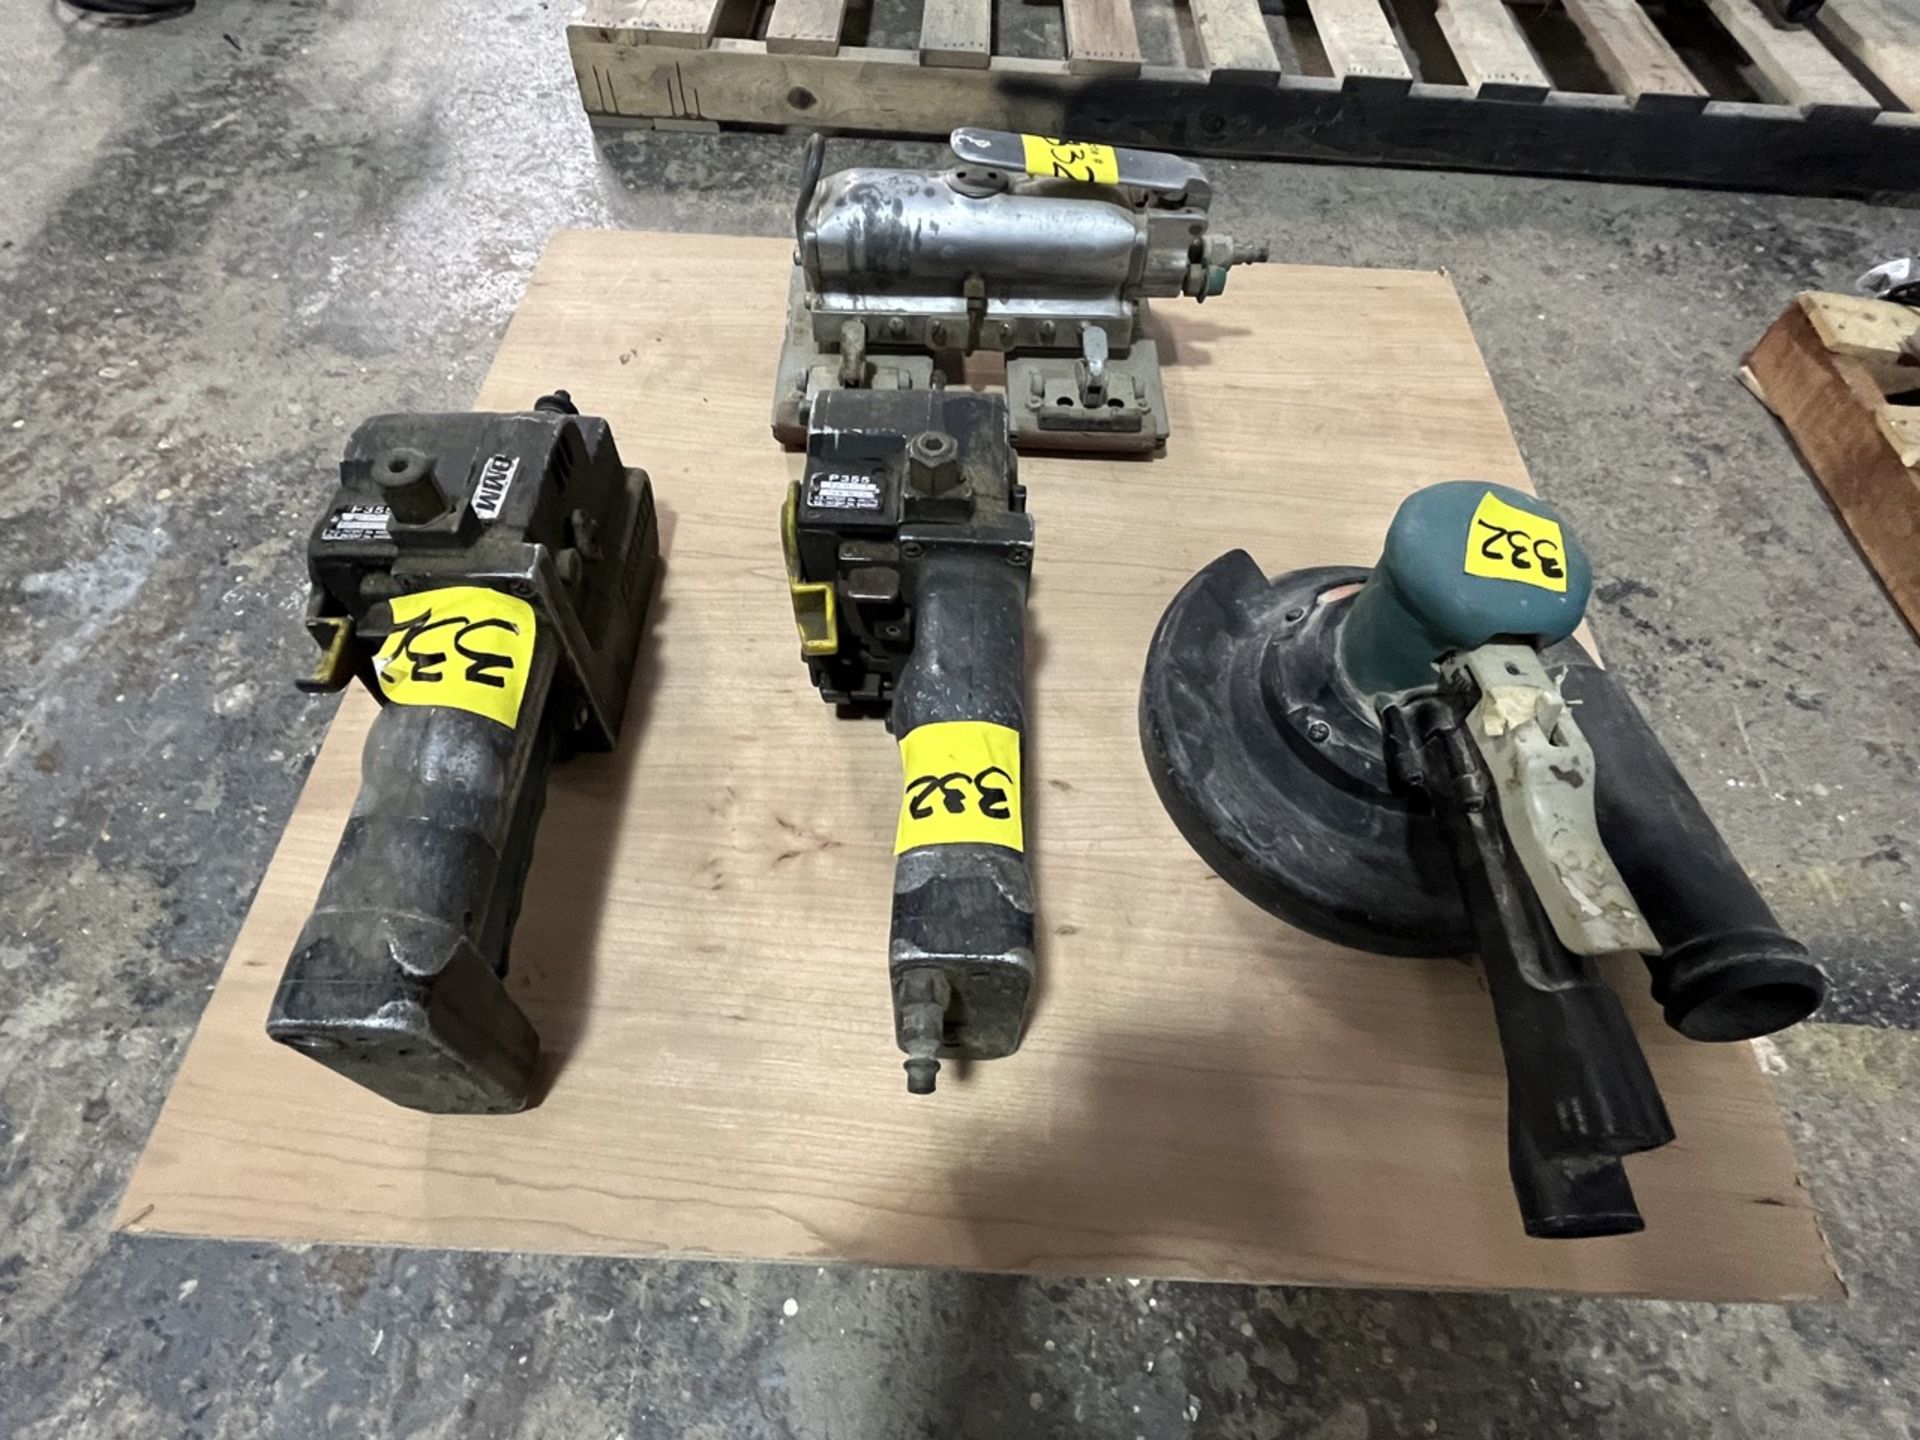 Lot of 4 pieces contains: 2 Fromm brand pneumatic wood brushes; 1 Sundstrand brand pneumatic sander - Image 4 of 10